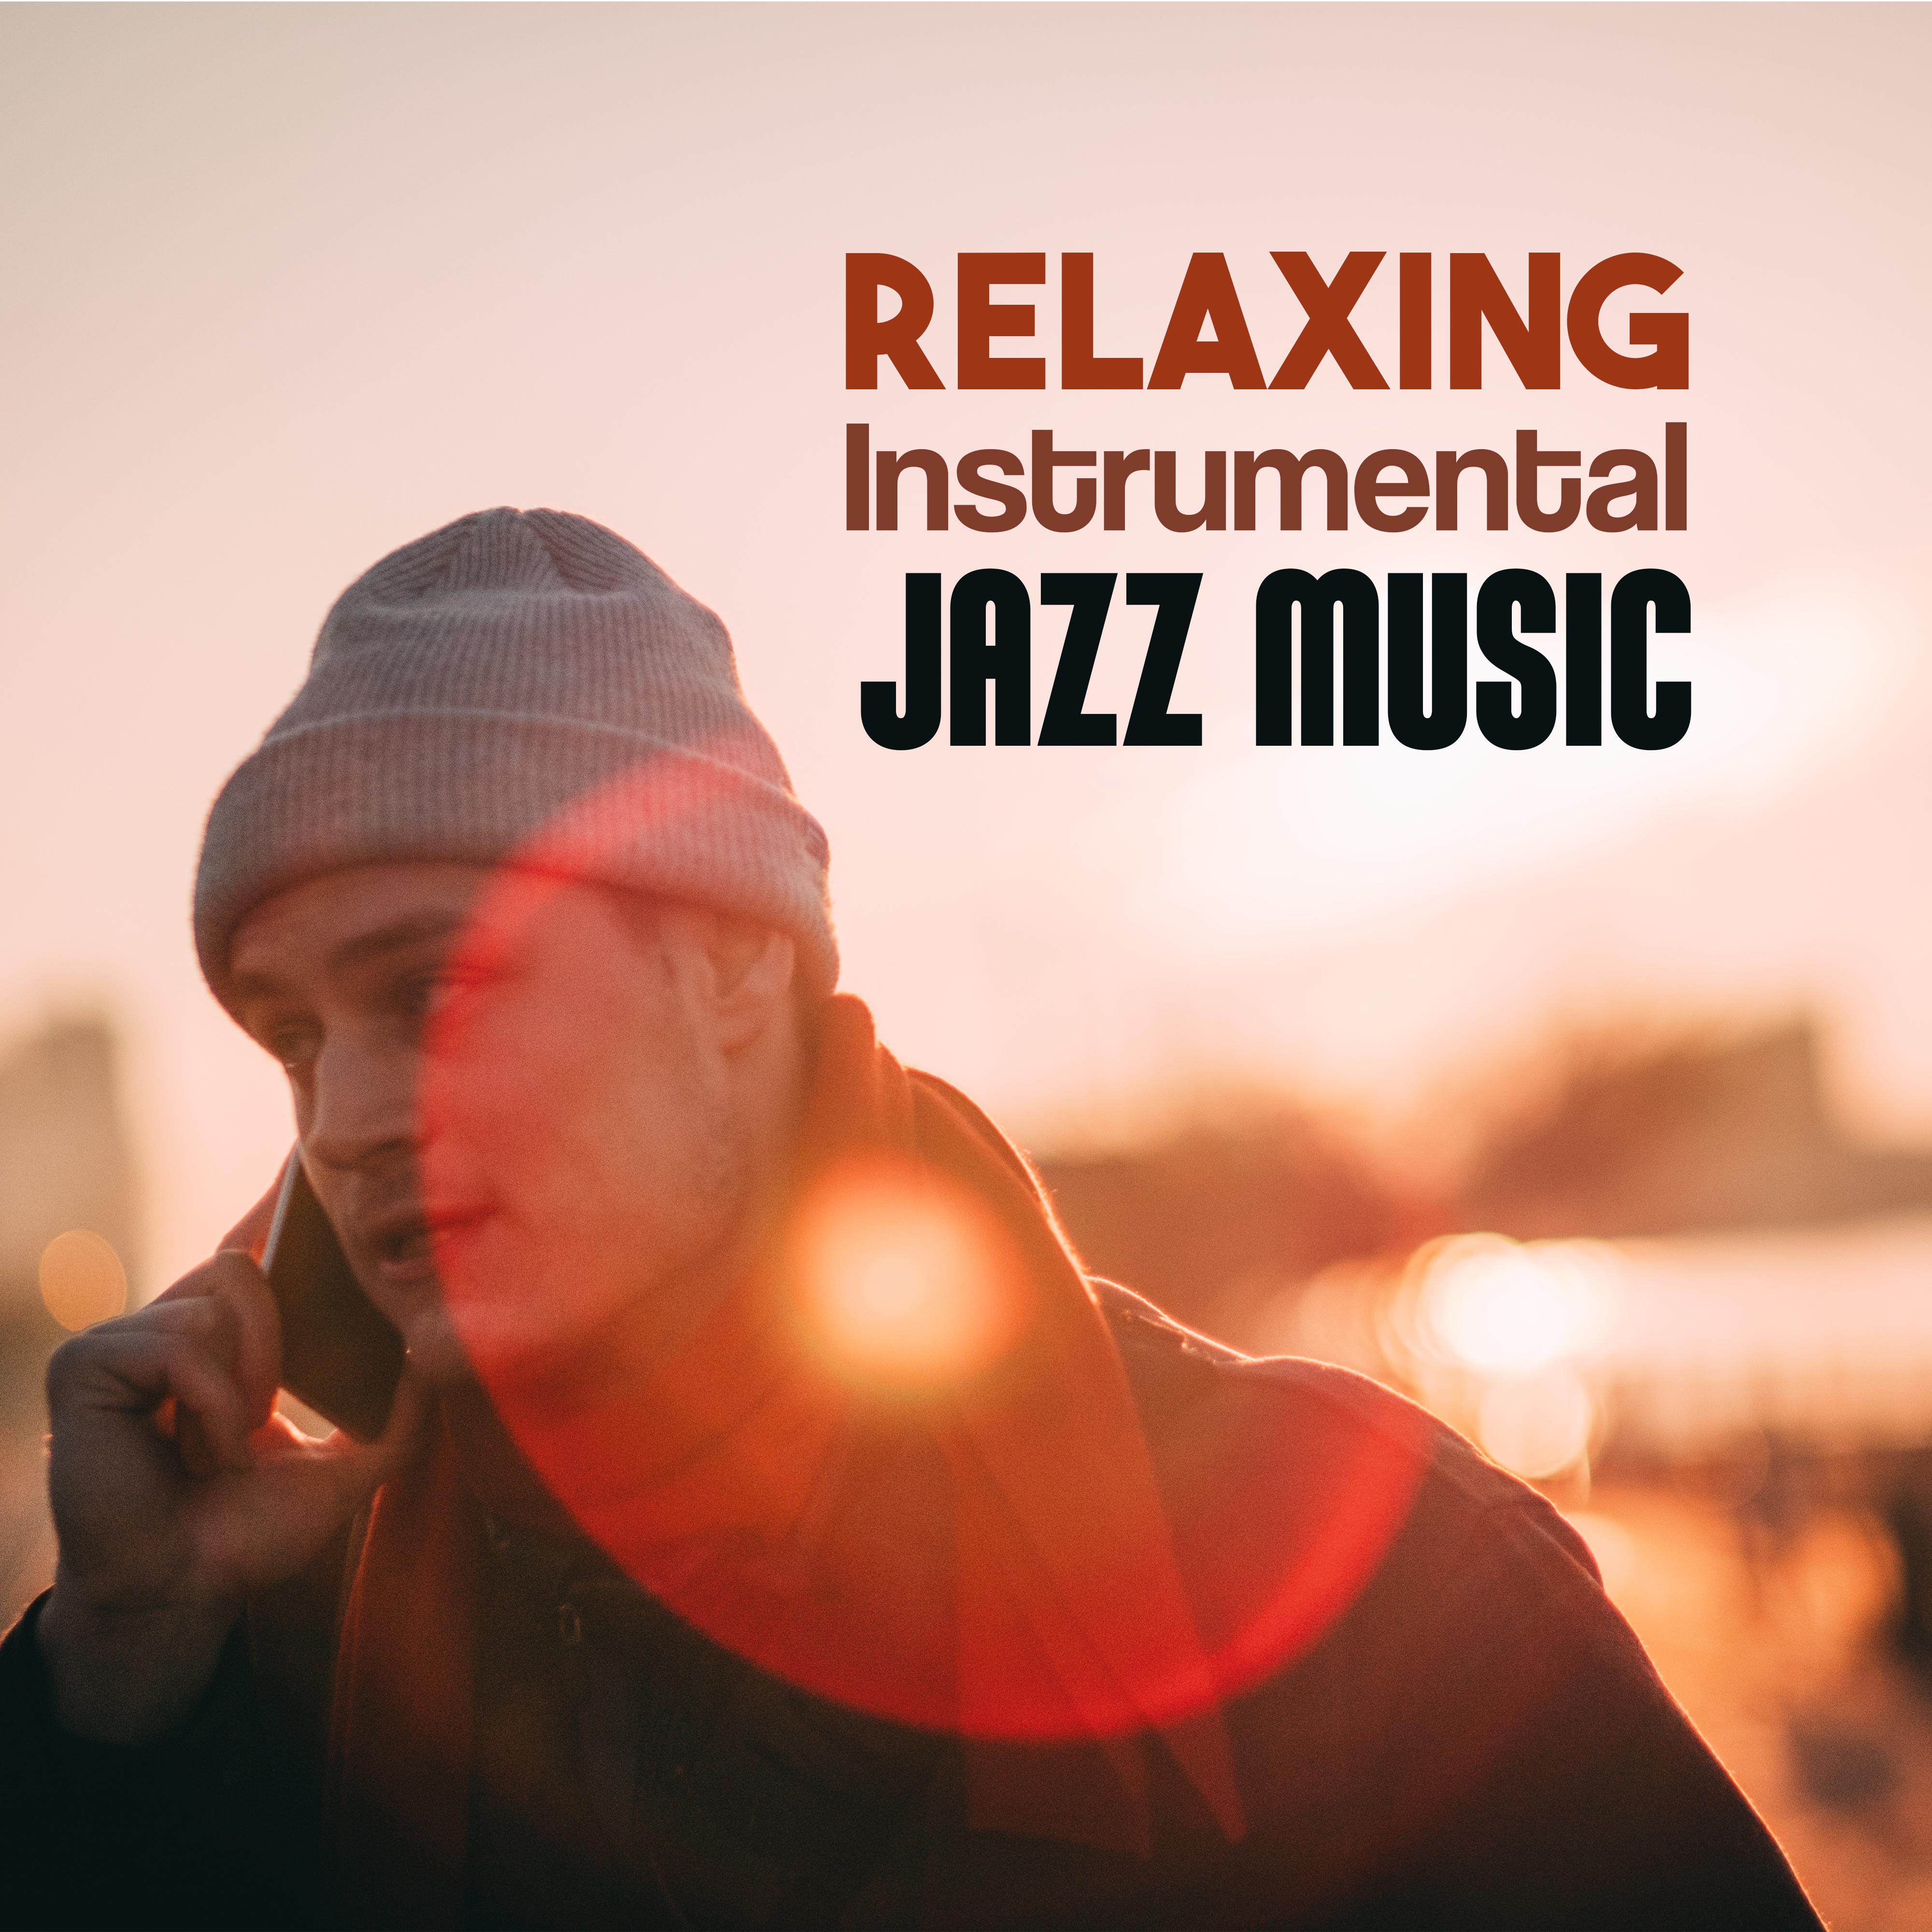 Relaxing Instrumental Jazz Music  Soft Sounds to Relax, Piano Relaxation, Easy Listening, Guitar Vibes, Rest a Bit